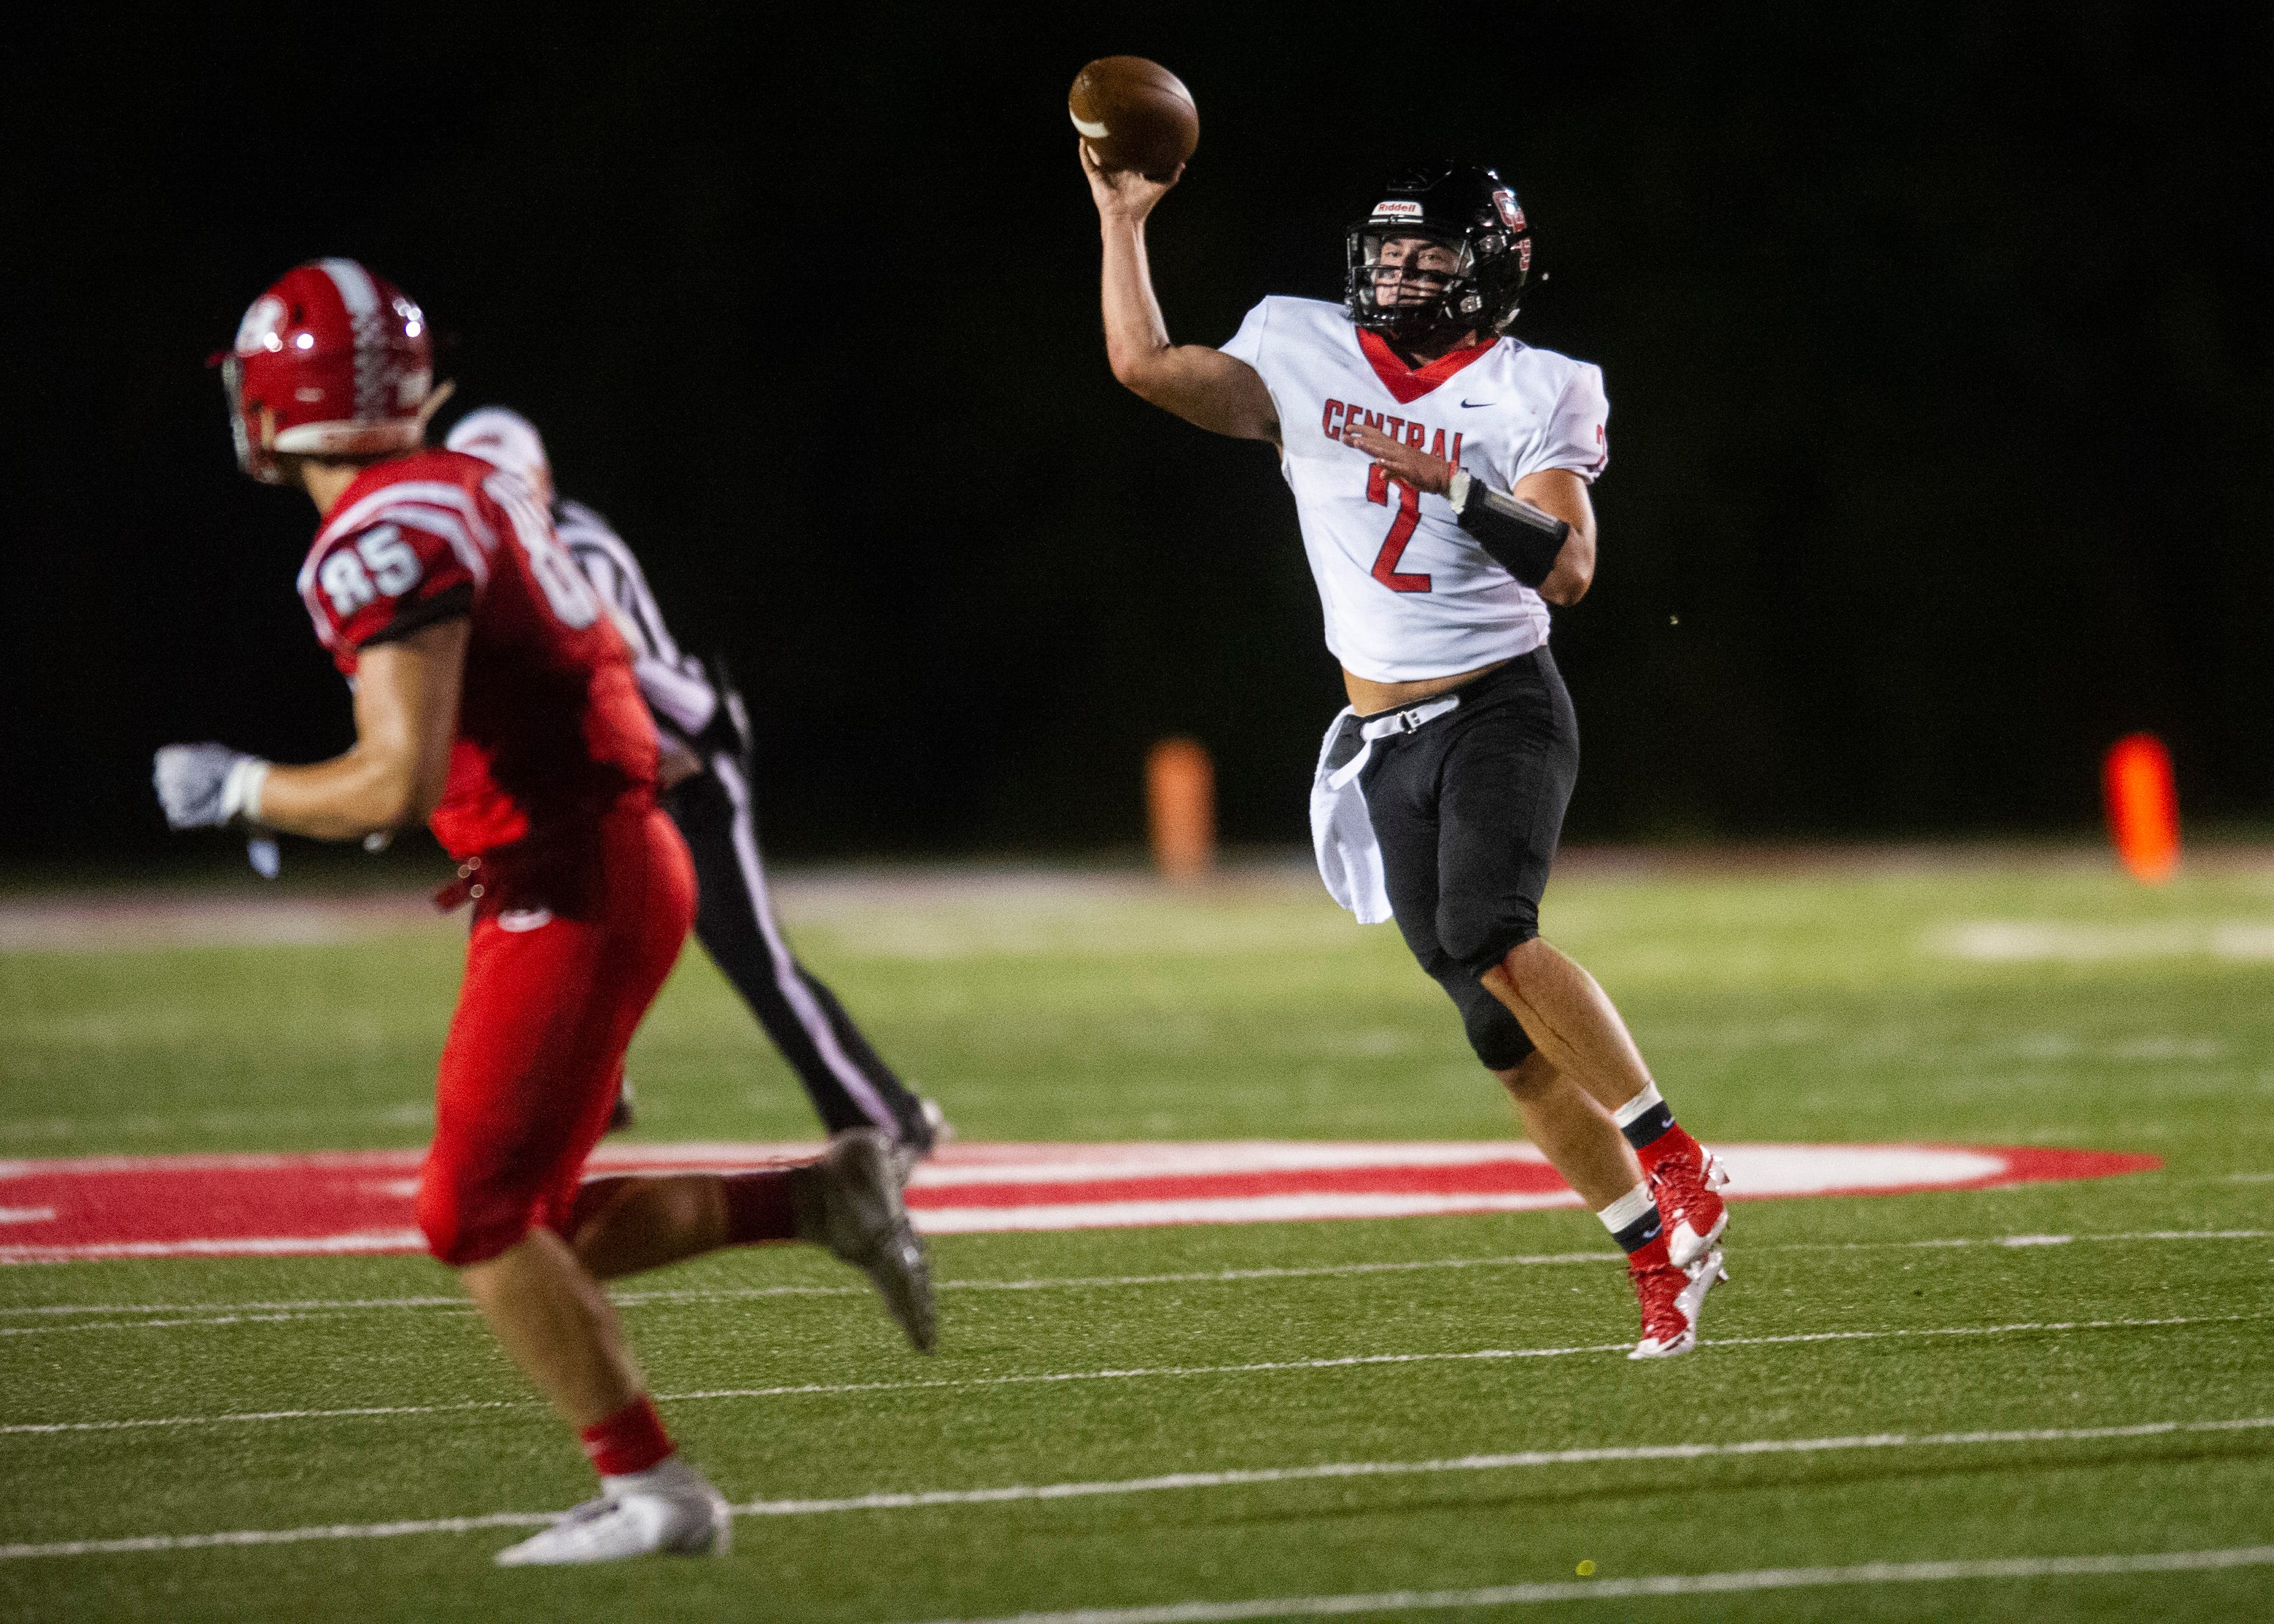 Central's Dakota Fawver (2) prepress to throw the ball during the Halls and Central high school football game on Friday, October 4, 2019 at Halls High School.